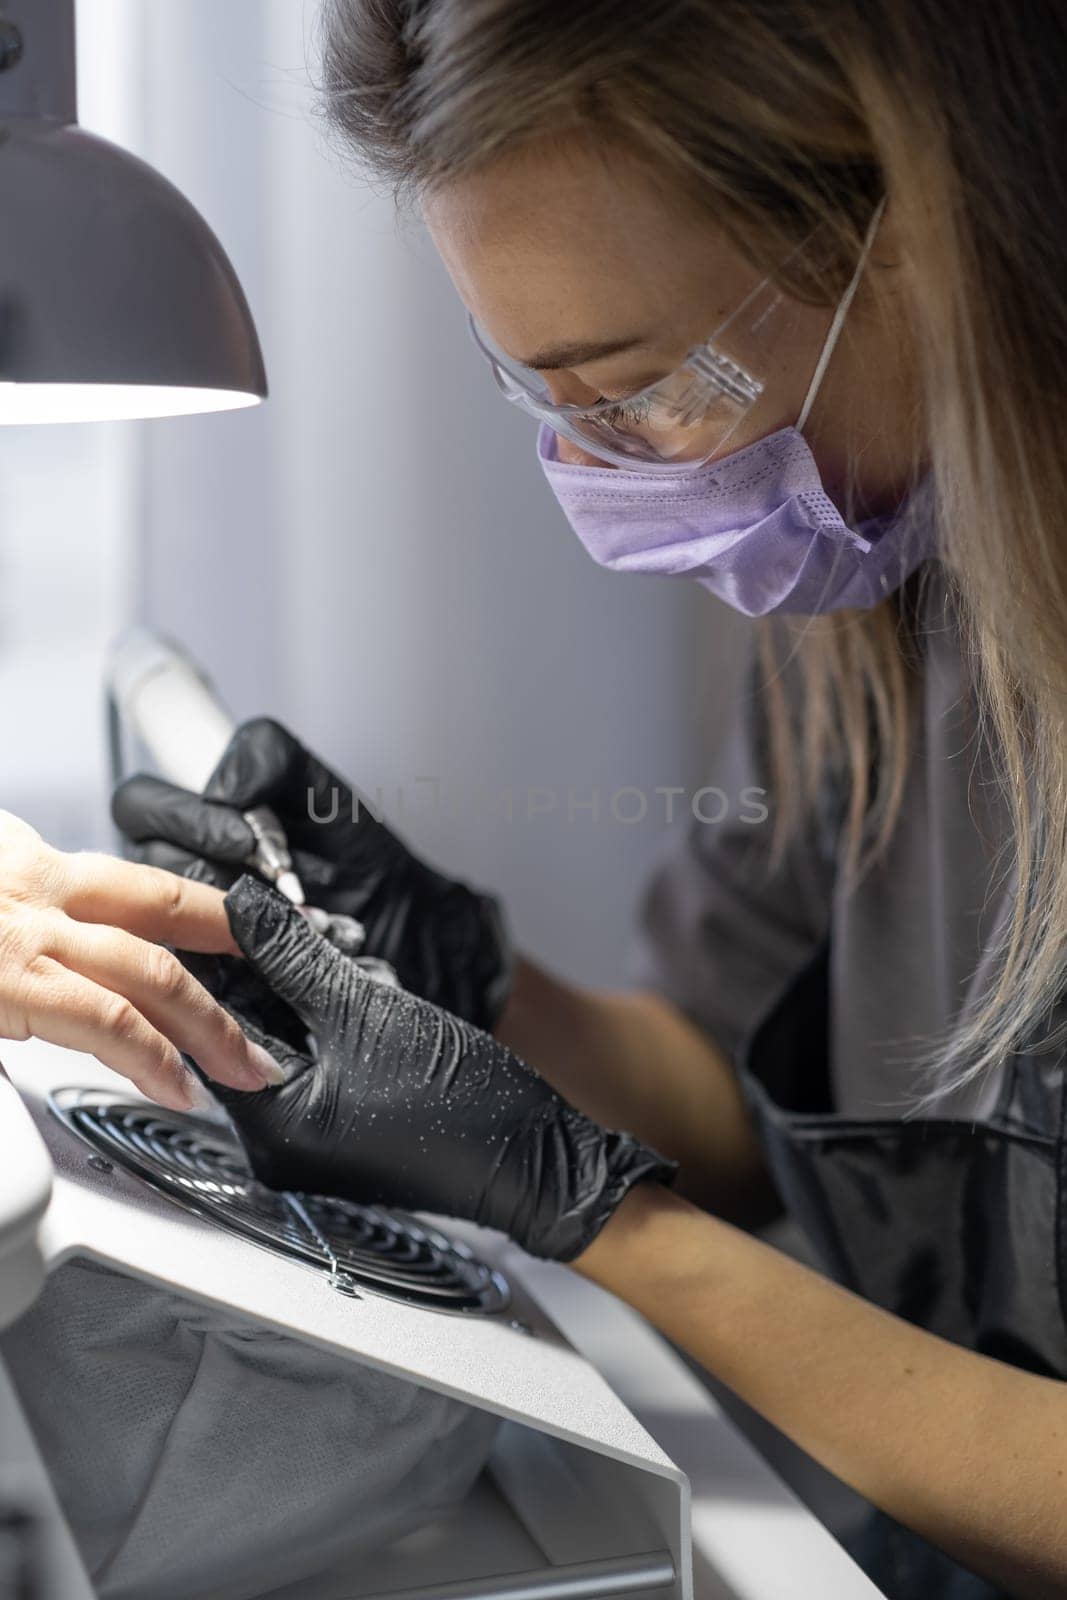 Manicurist at work. Professional manicurist removes old worn nail design from nails of client using modern electric drill. Preparing fingernails for making fresh manicure and applying new nail design